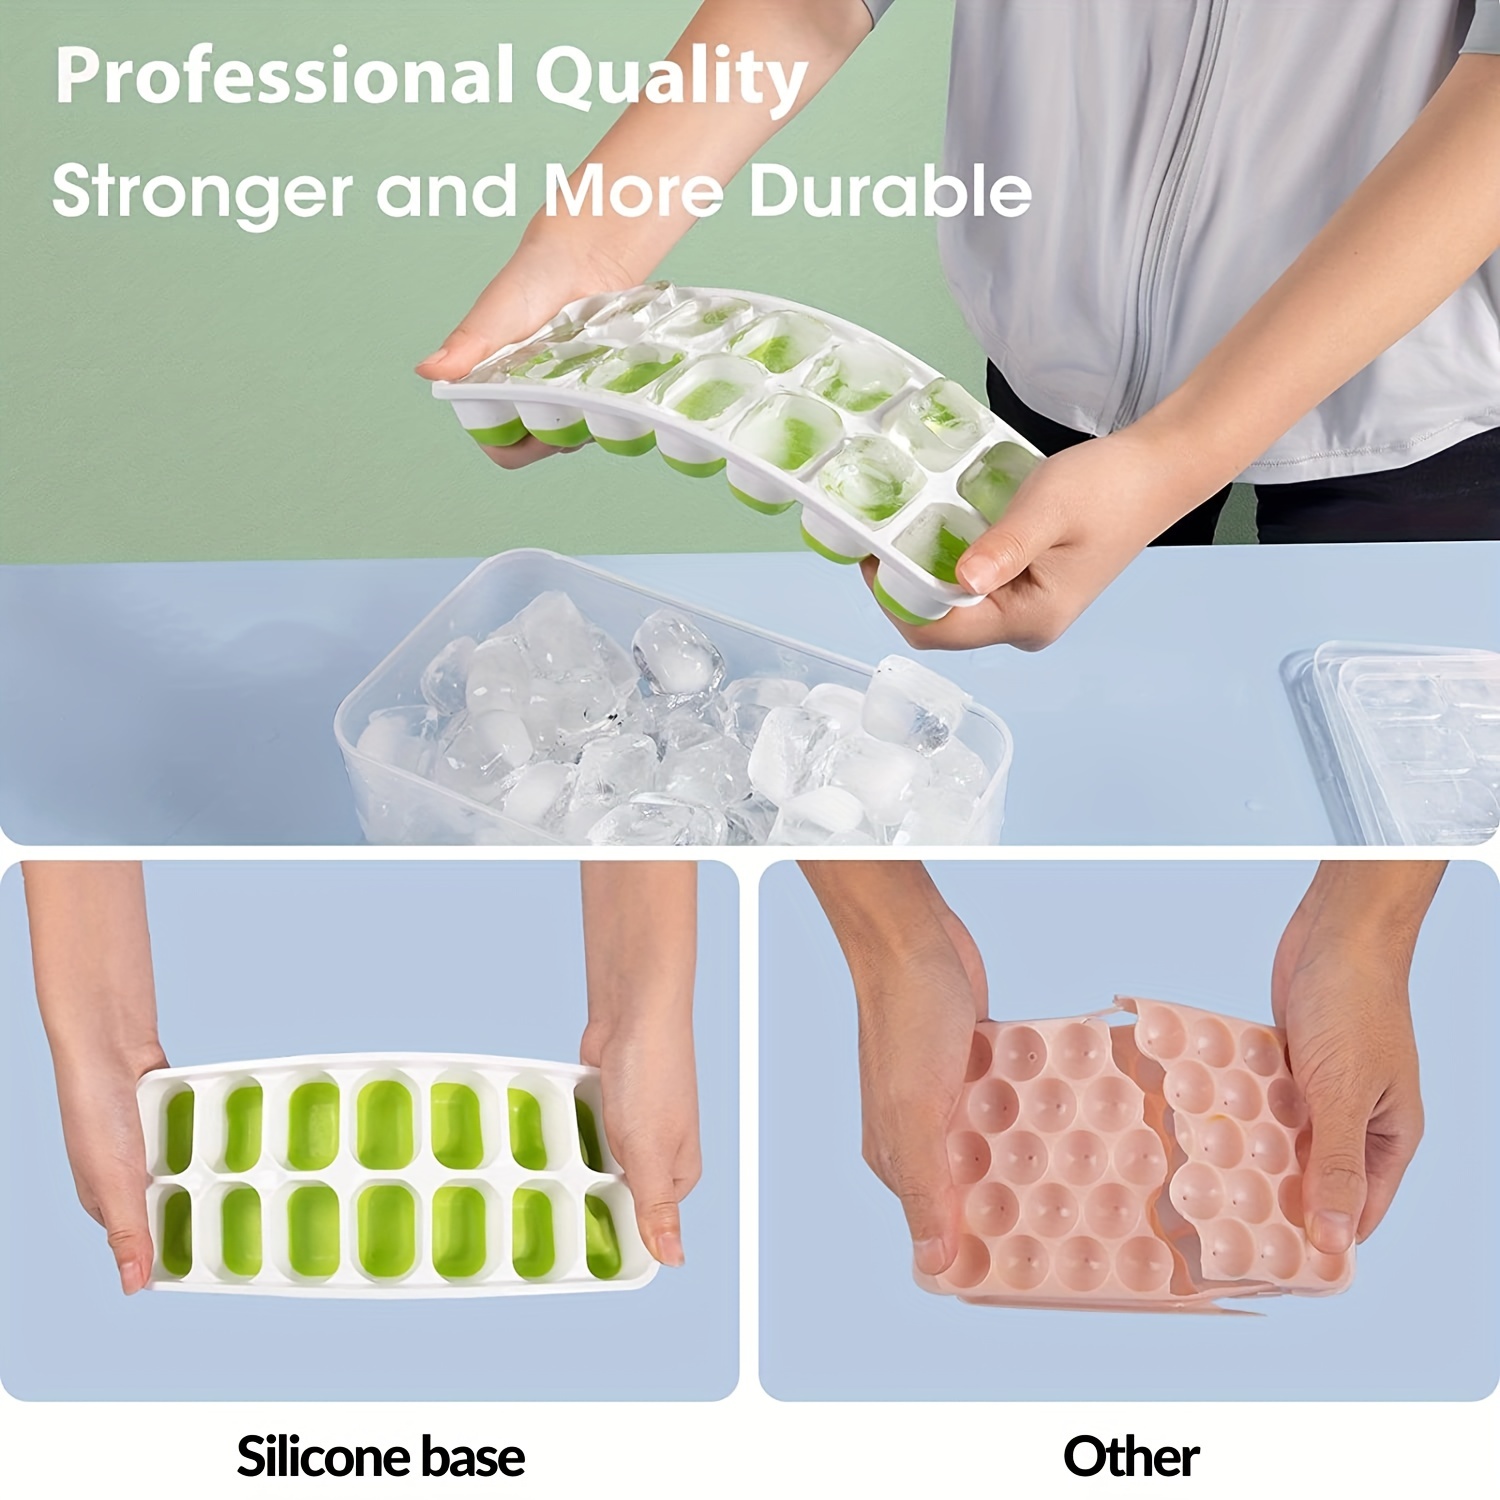 4pack Small Round Ice Cube Tray for Freezer, Plastic Ice Trays